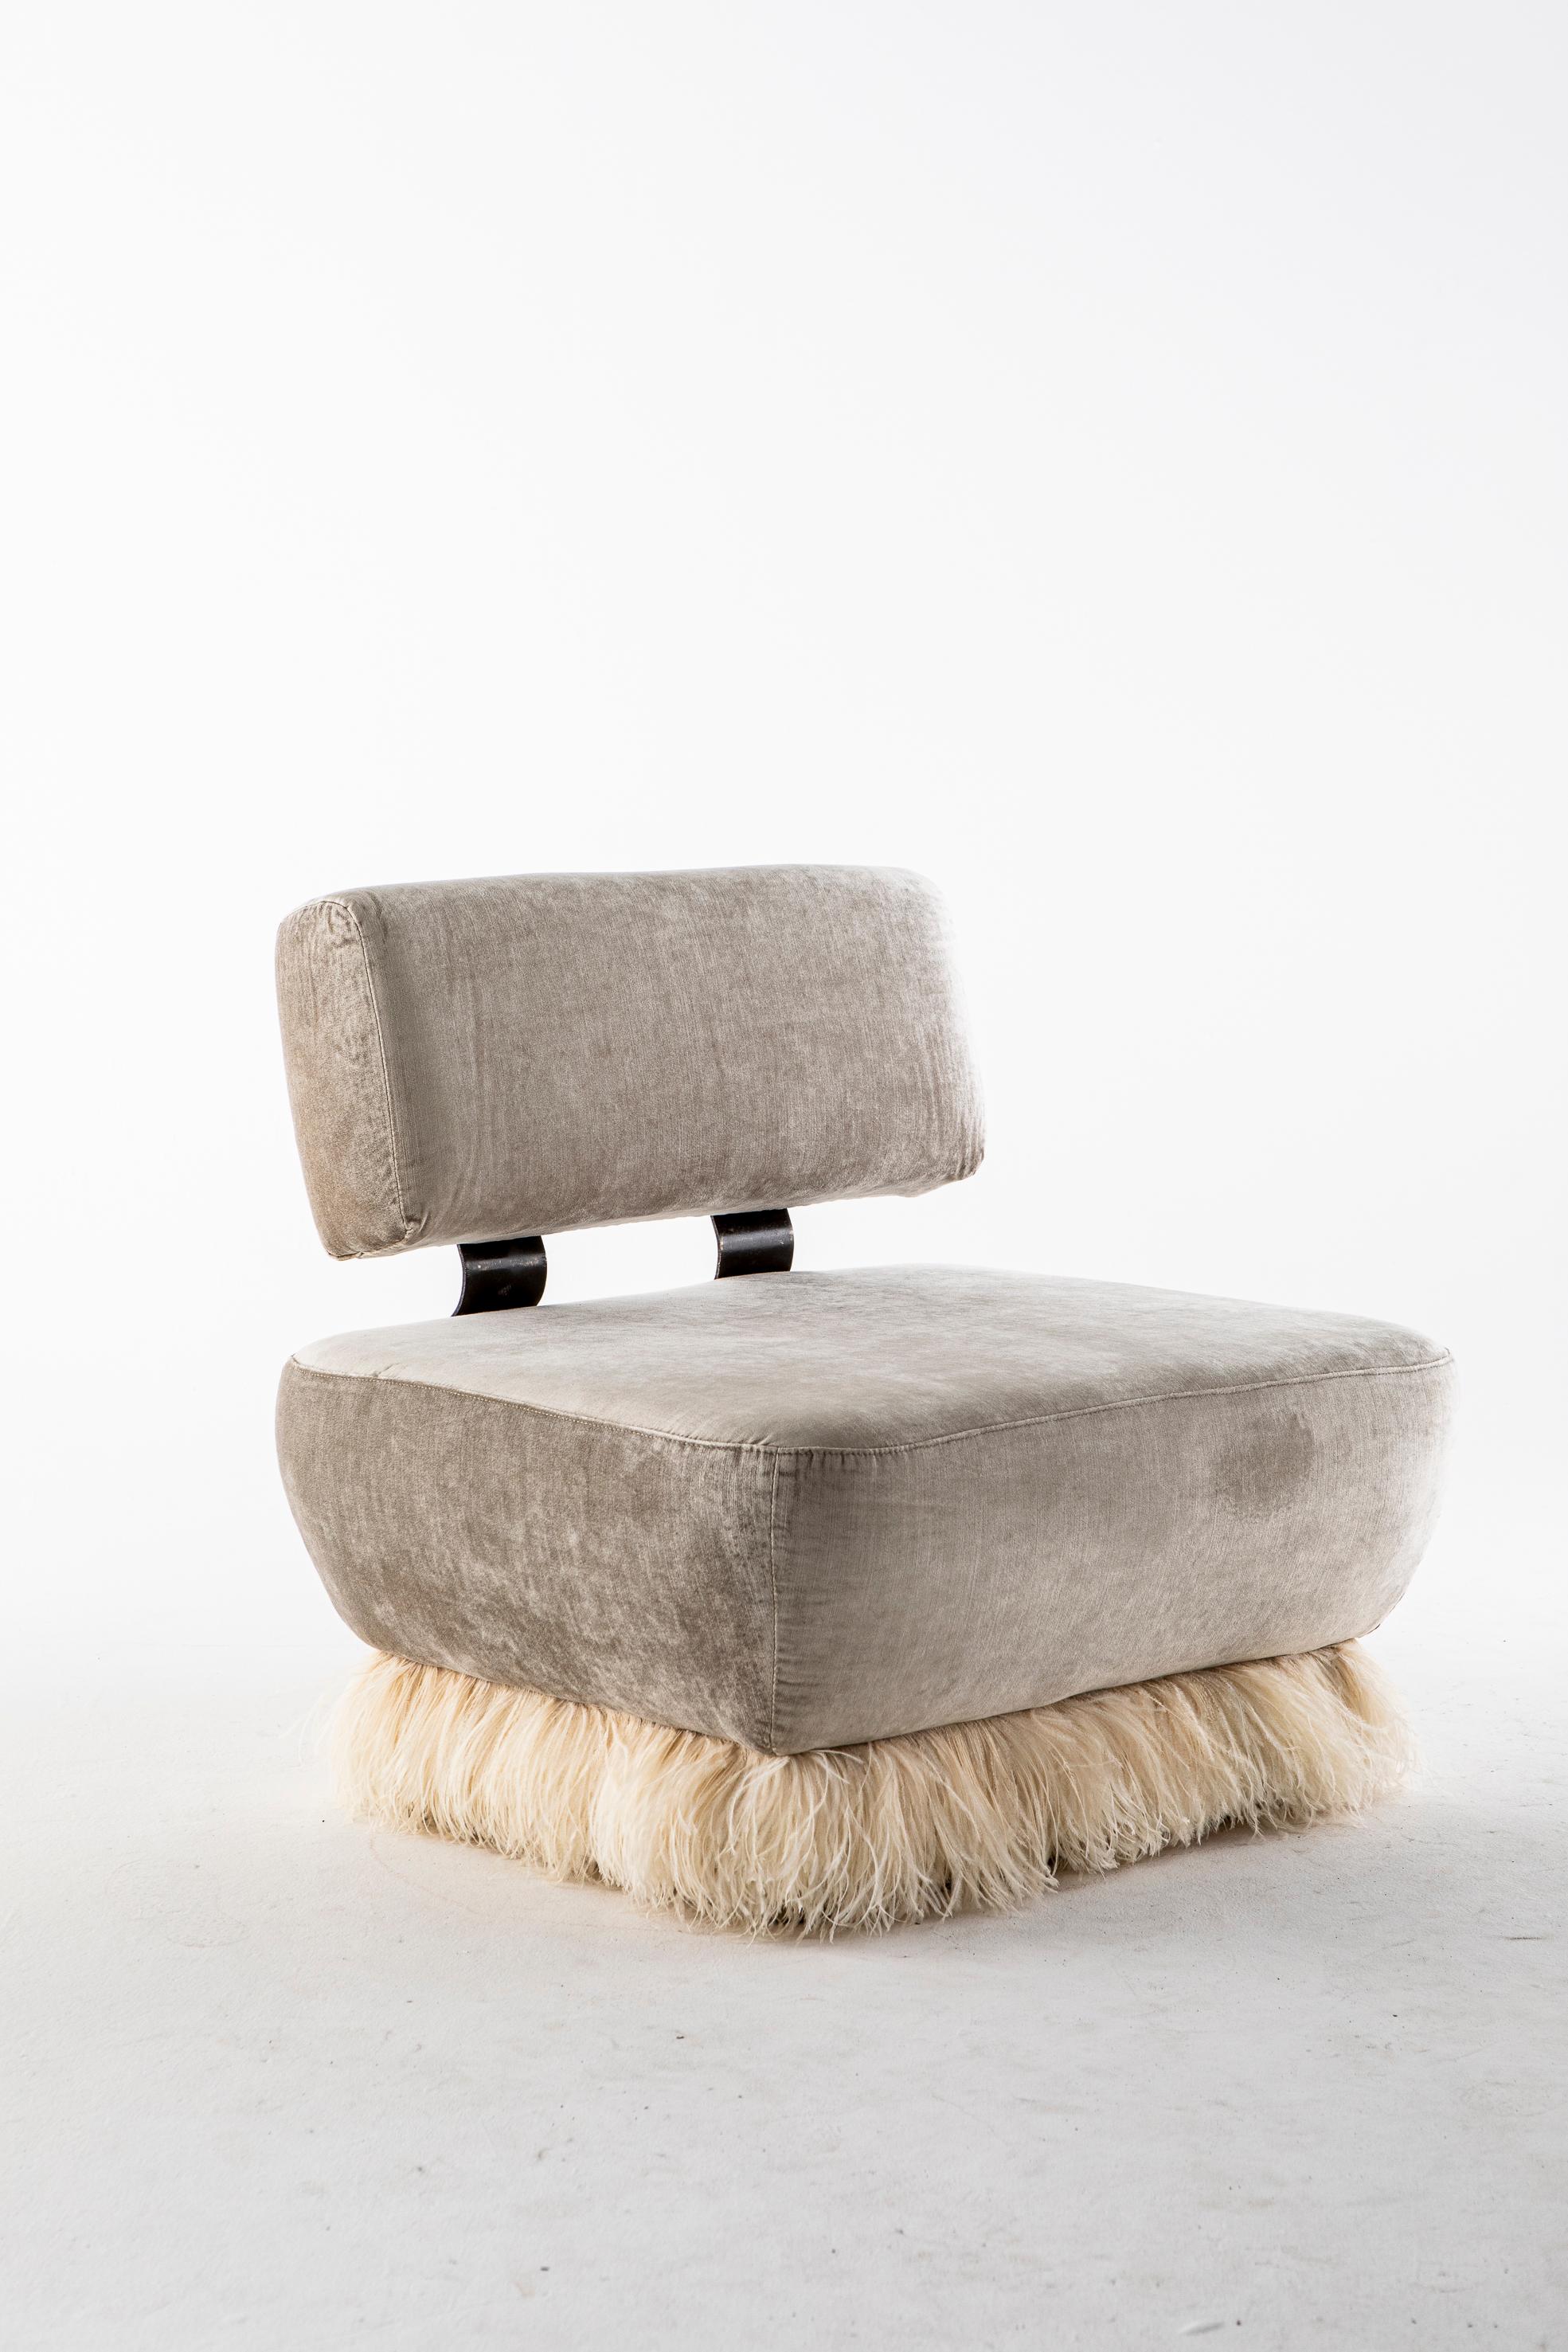 Ostrich fluff lounge chair by Egg Designs.
Dimensions: 92 L X 76 D X 85 H cm
Materials: bronzed steel, brass buttons, ostrich feather trim, velvet upholstery.

Founded by South Africans and life partners, Greg and Roche Dry - Egg is a unique